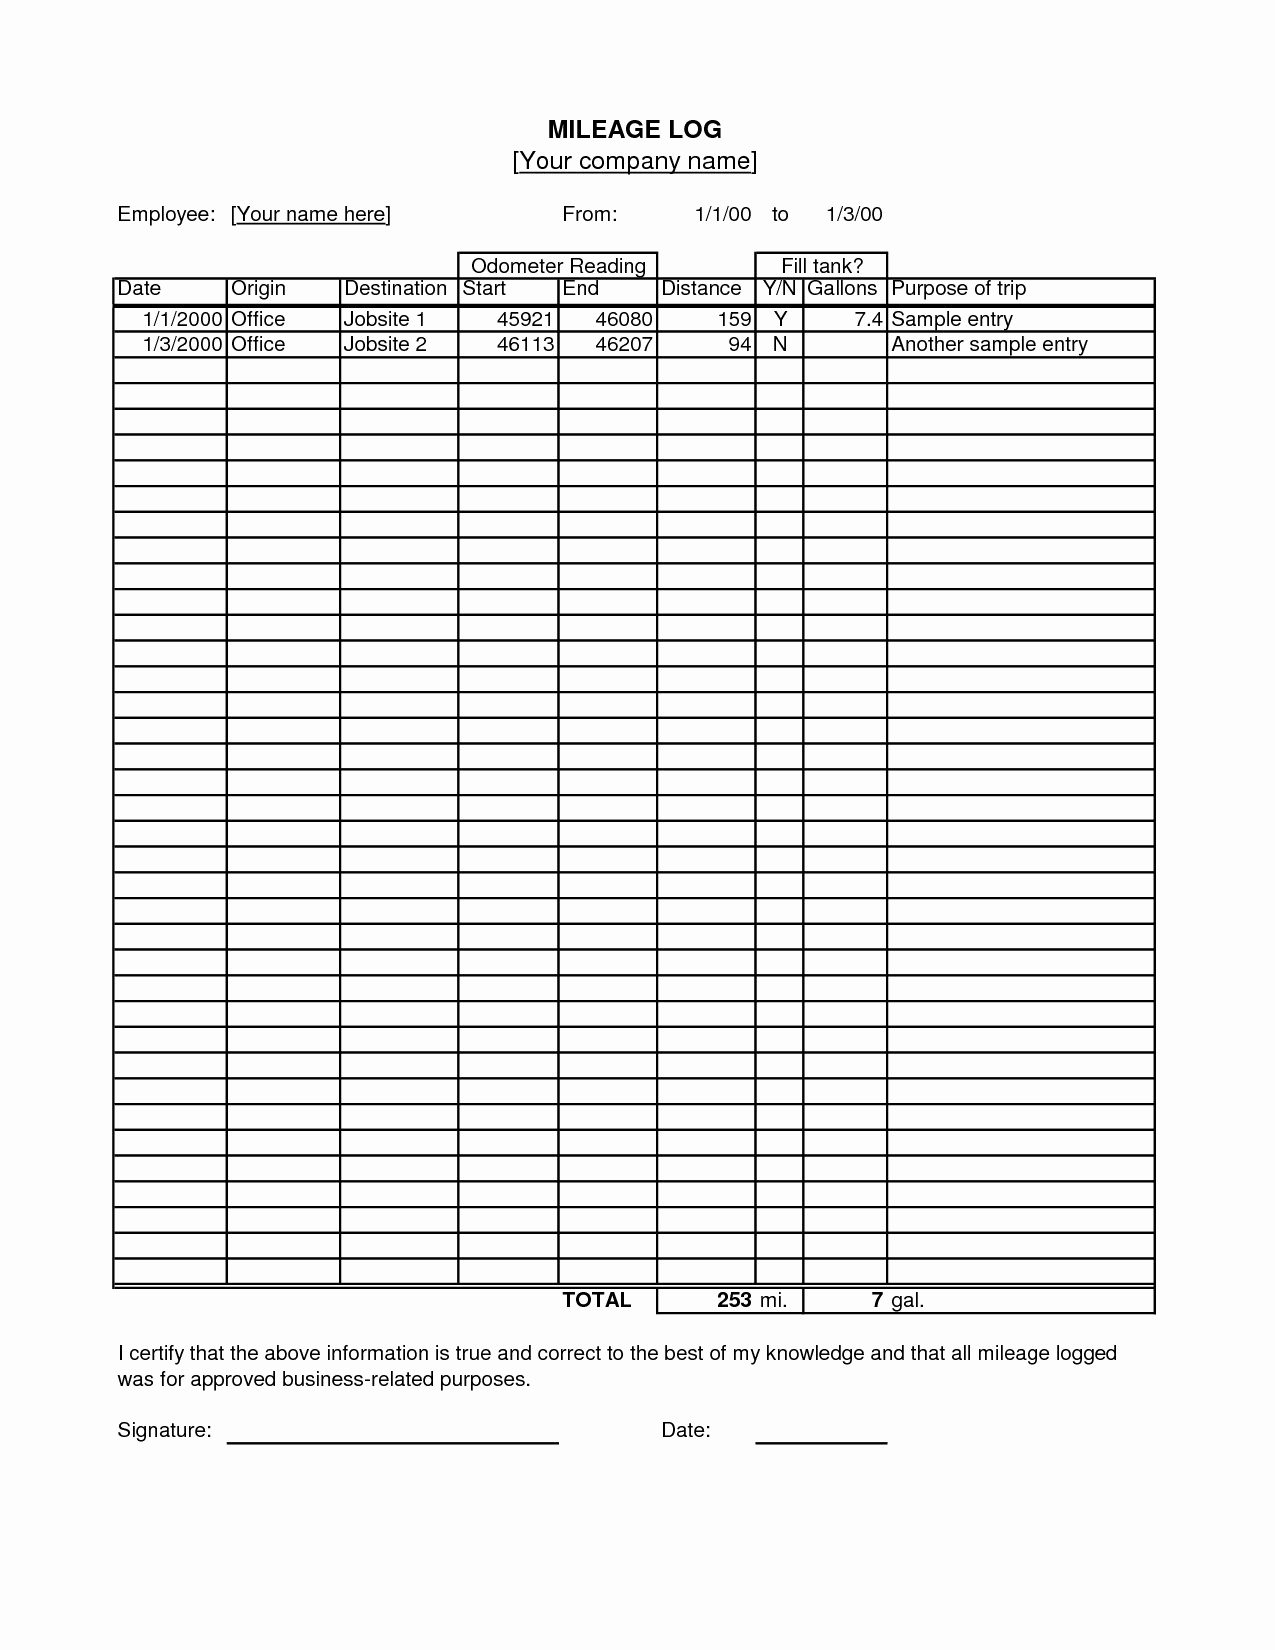 Mileage Log Templates | 16+ Free Printable Word, Pdf & Excel Formats Throughout Mileage Report Template